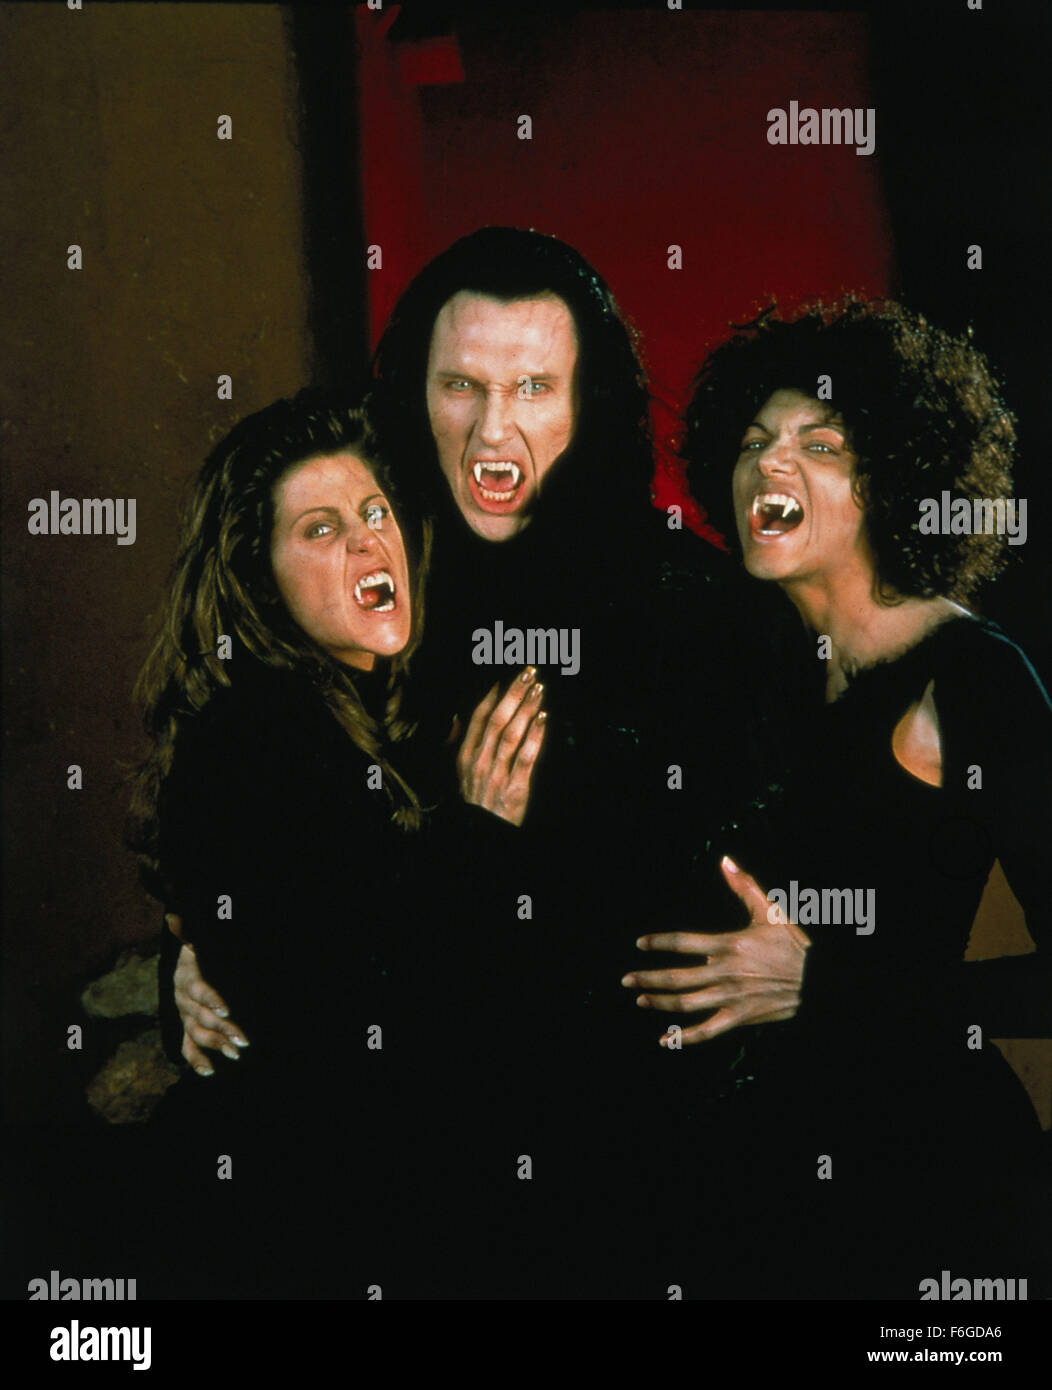 Oct 30, 1998; Los Angeles, CA, USA; From director John Carpenter and Columbia Pictures comes the action/horror film 'Vampires' starring James Woods as Jack Crow and a cast from the underworld. Stock Photo